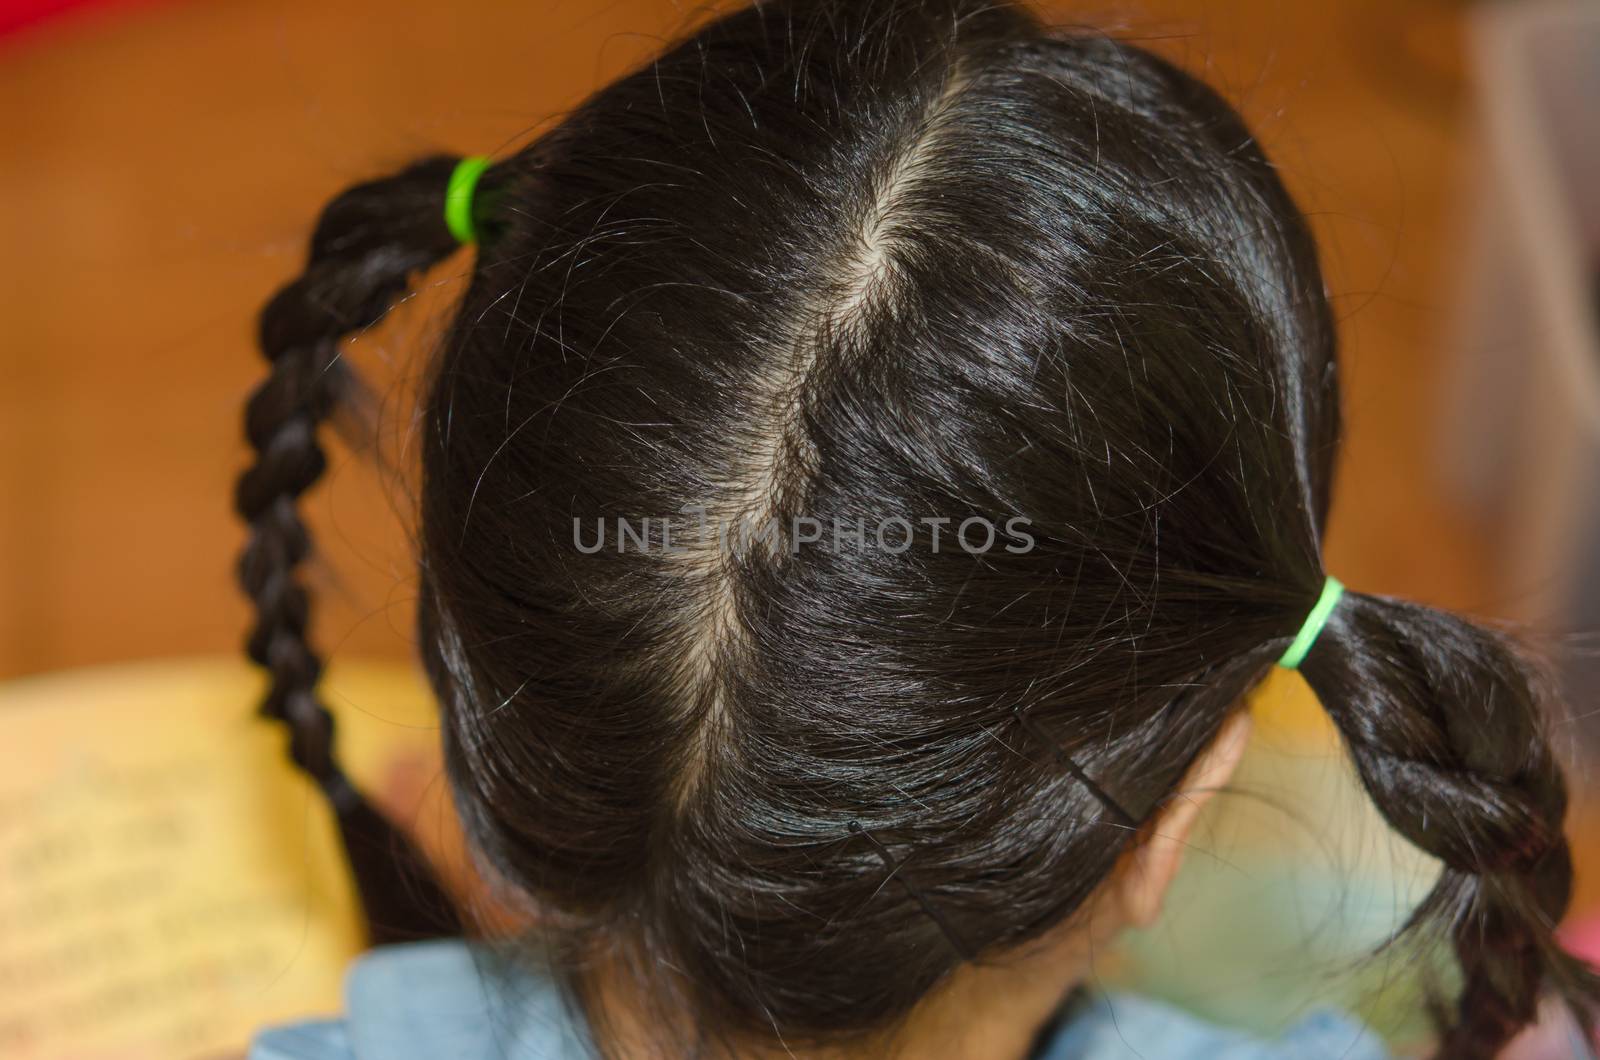 Asian girl portraits. The back of the girl's pigtails